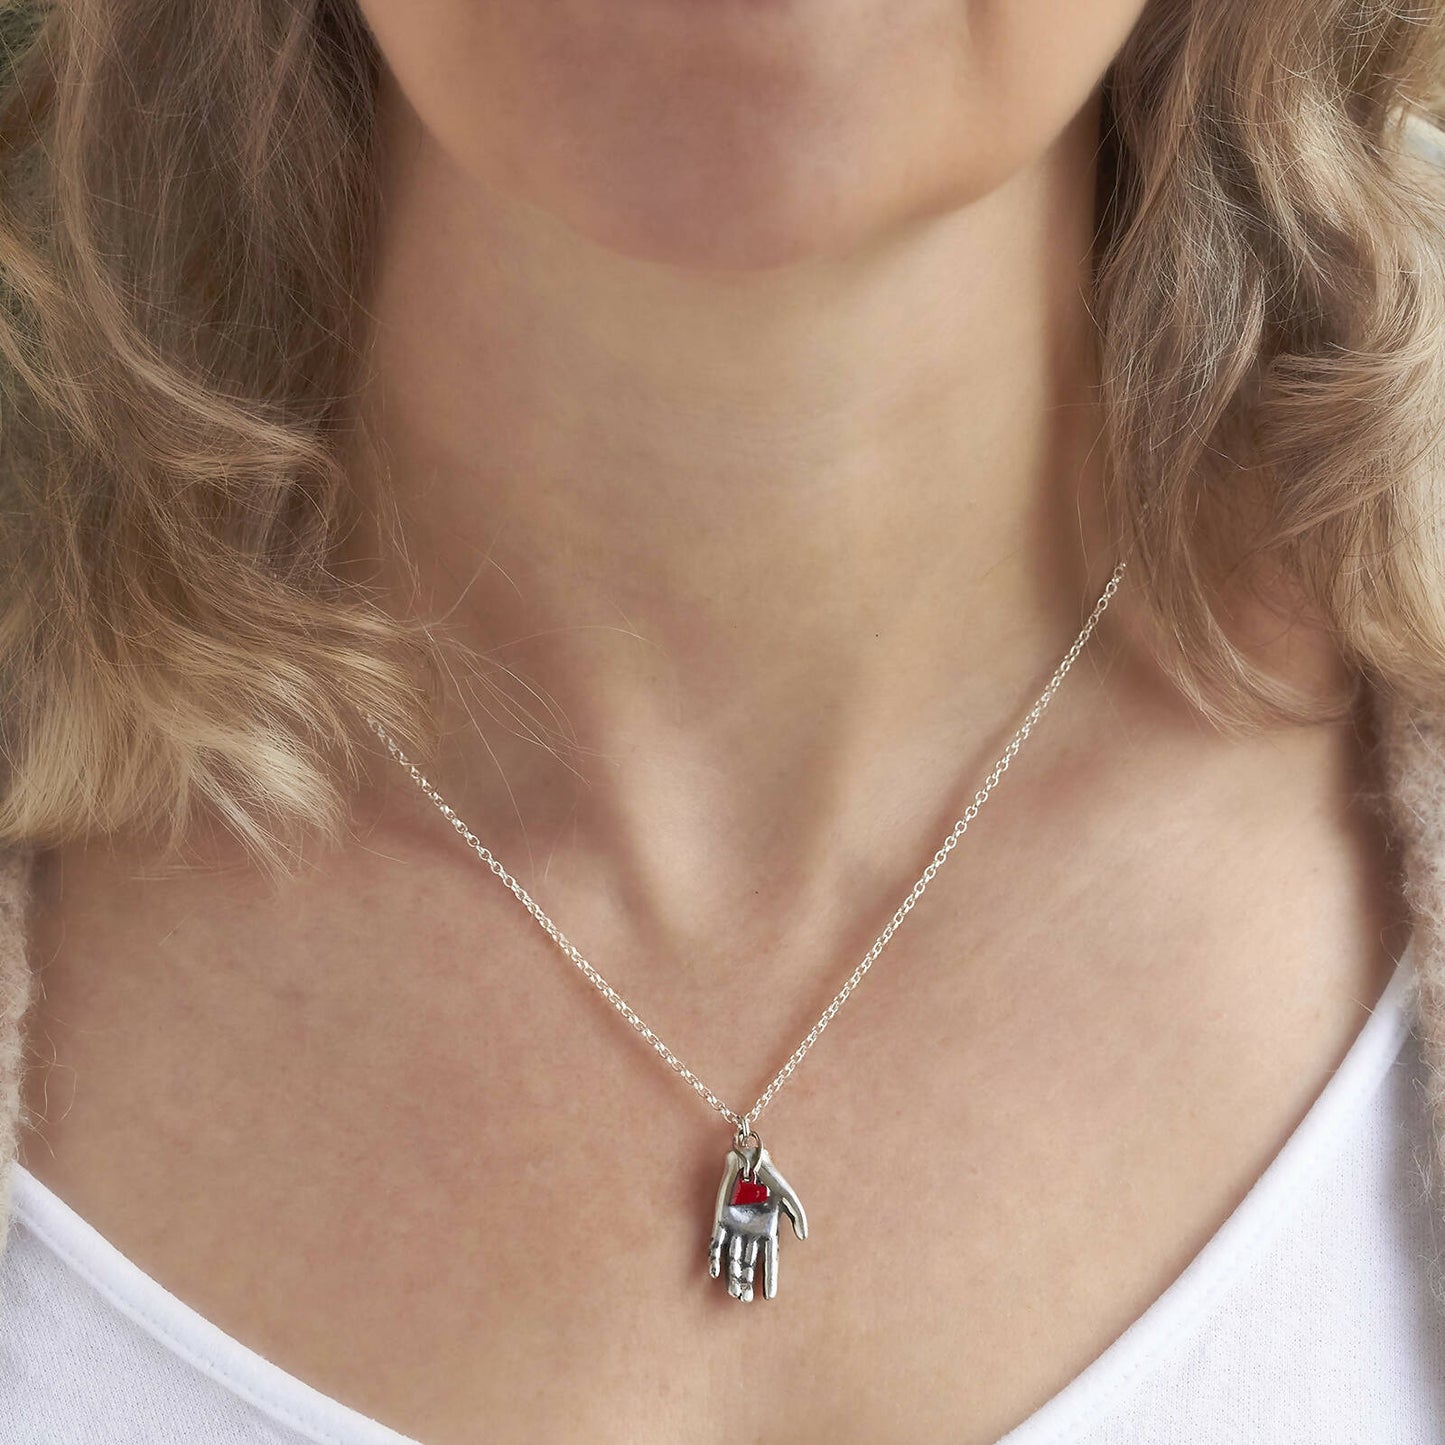 Red Heart in Hand Necklace by Emma White